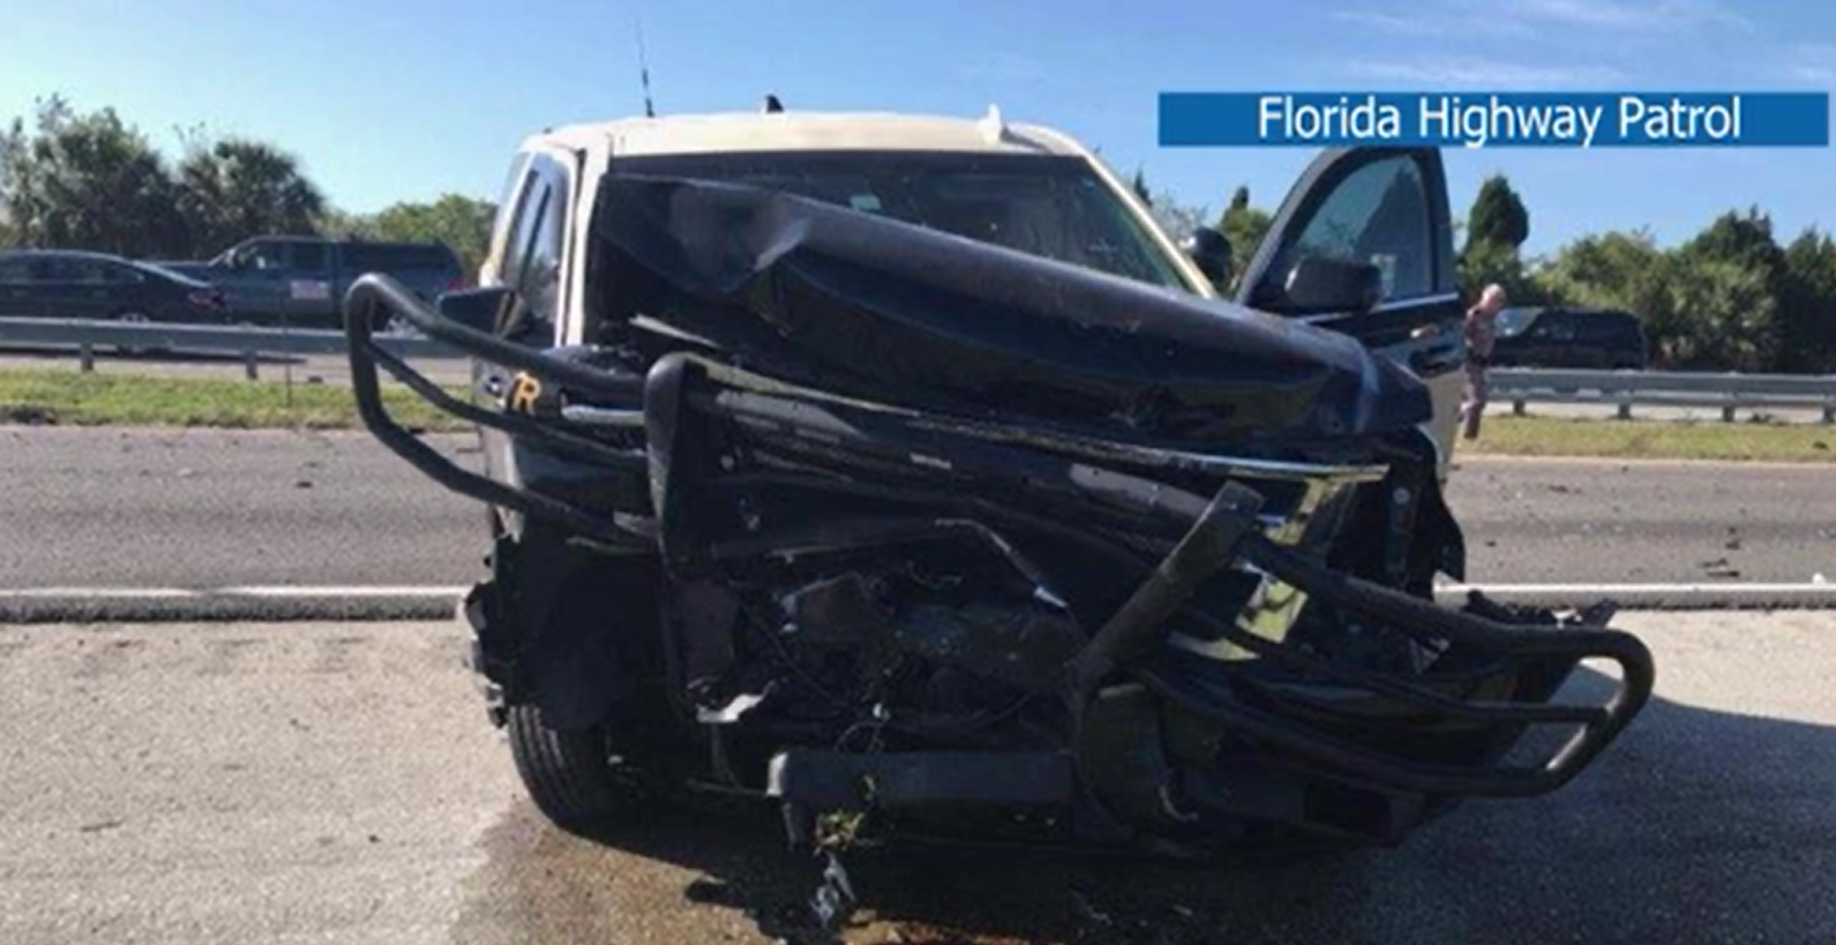 FHP Trooper Talks About Jumping Into Harm’s Way To Stop Drunk Driver: ‘Thankful She Didn’t Get Past Me’